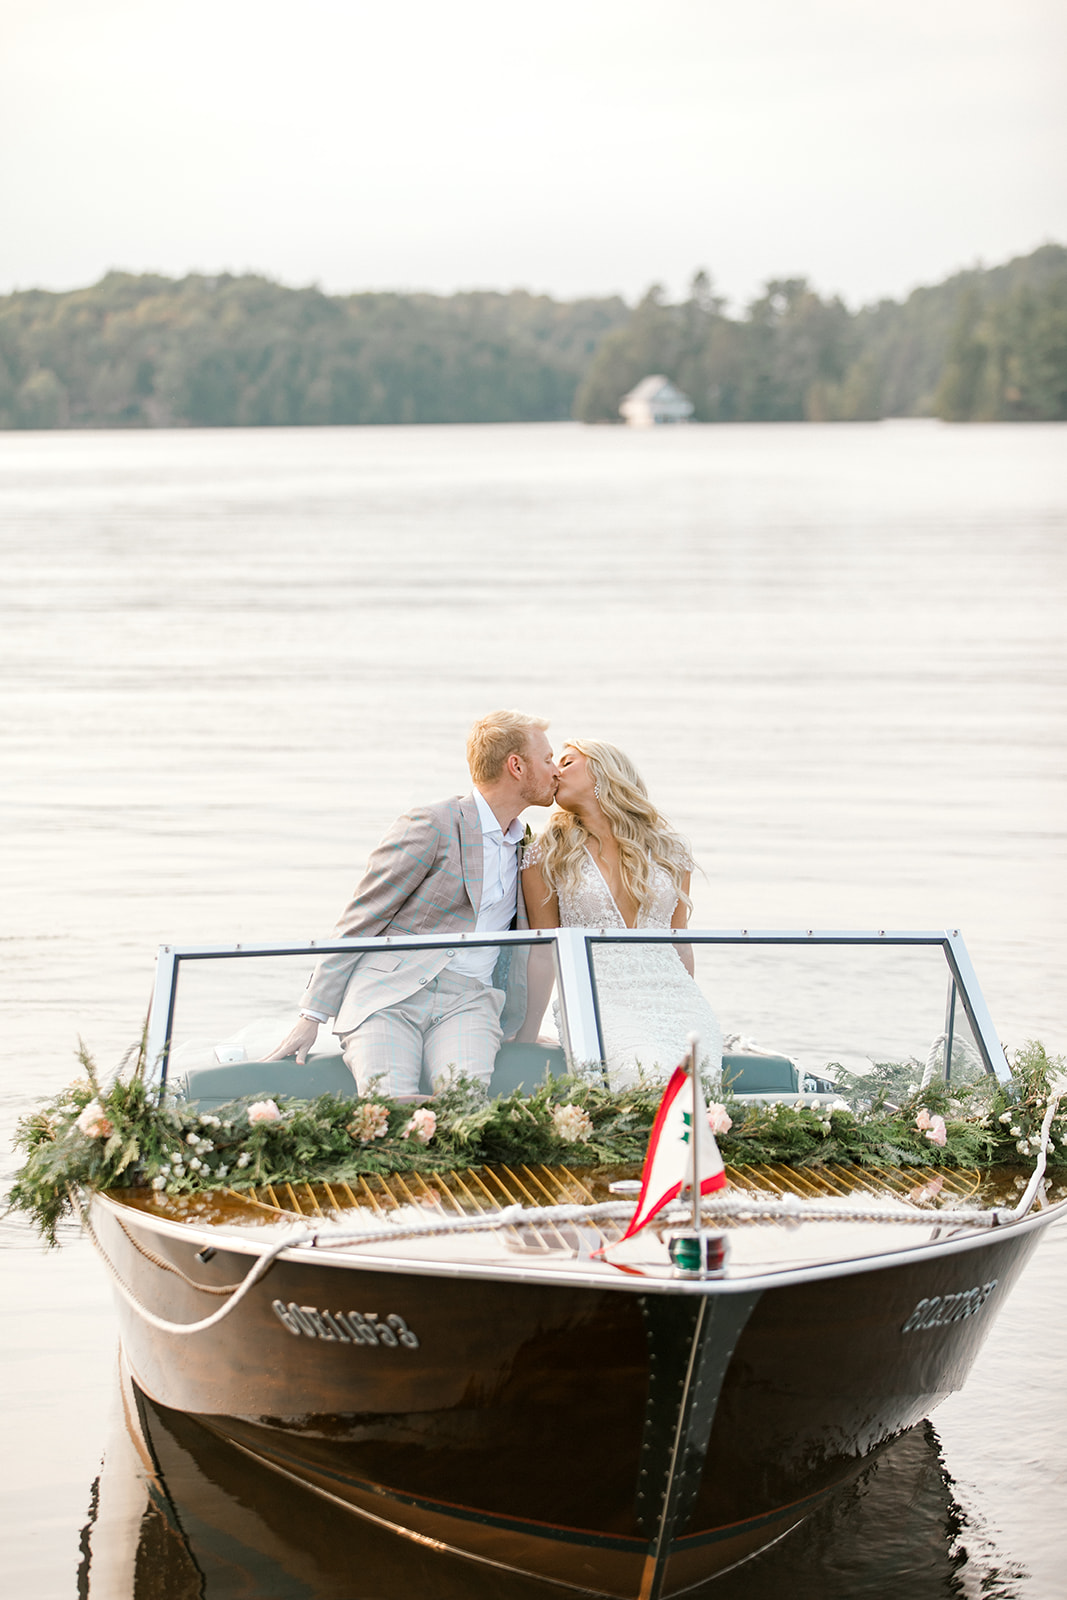 Couple kisses in a boat adorned in flowers during wedding reception in Port Carling, Muskoka